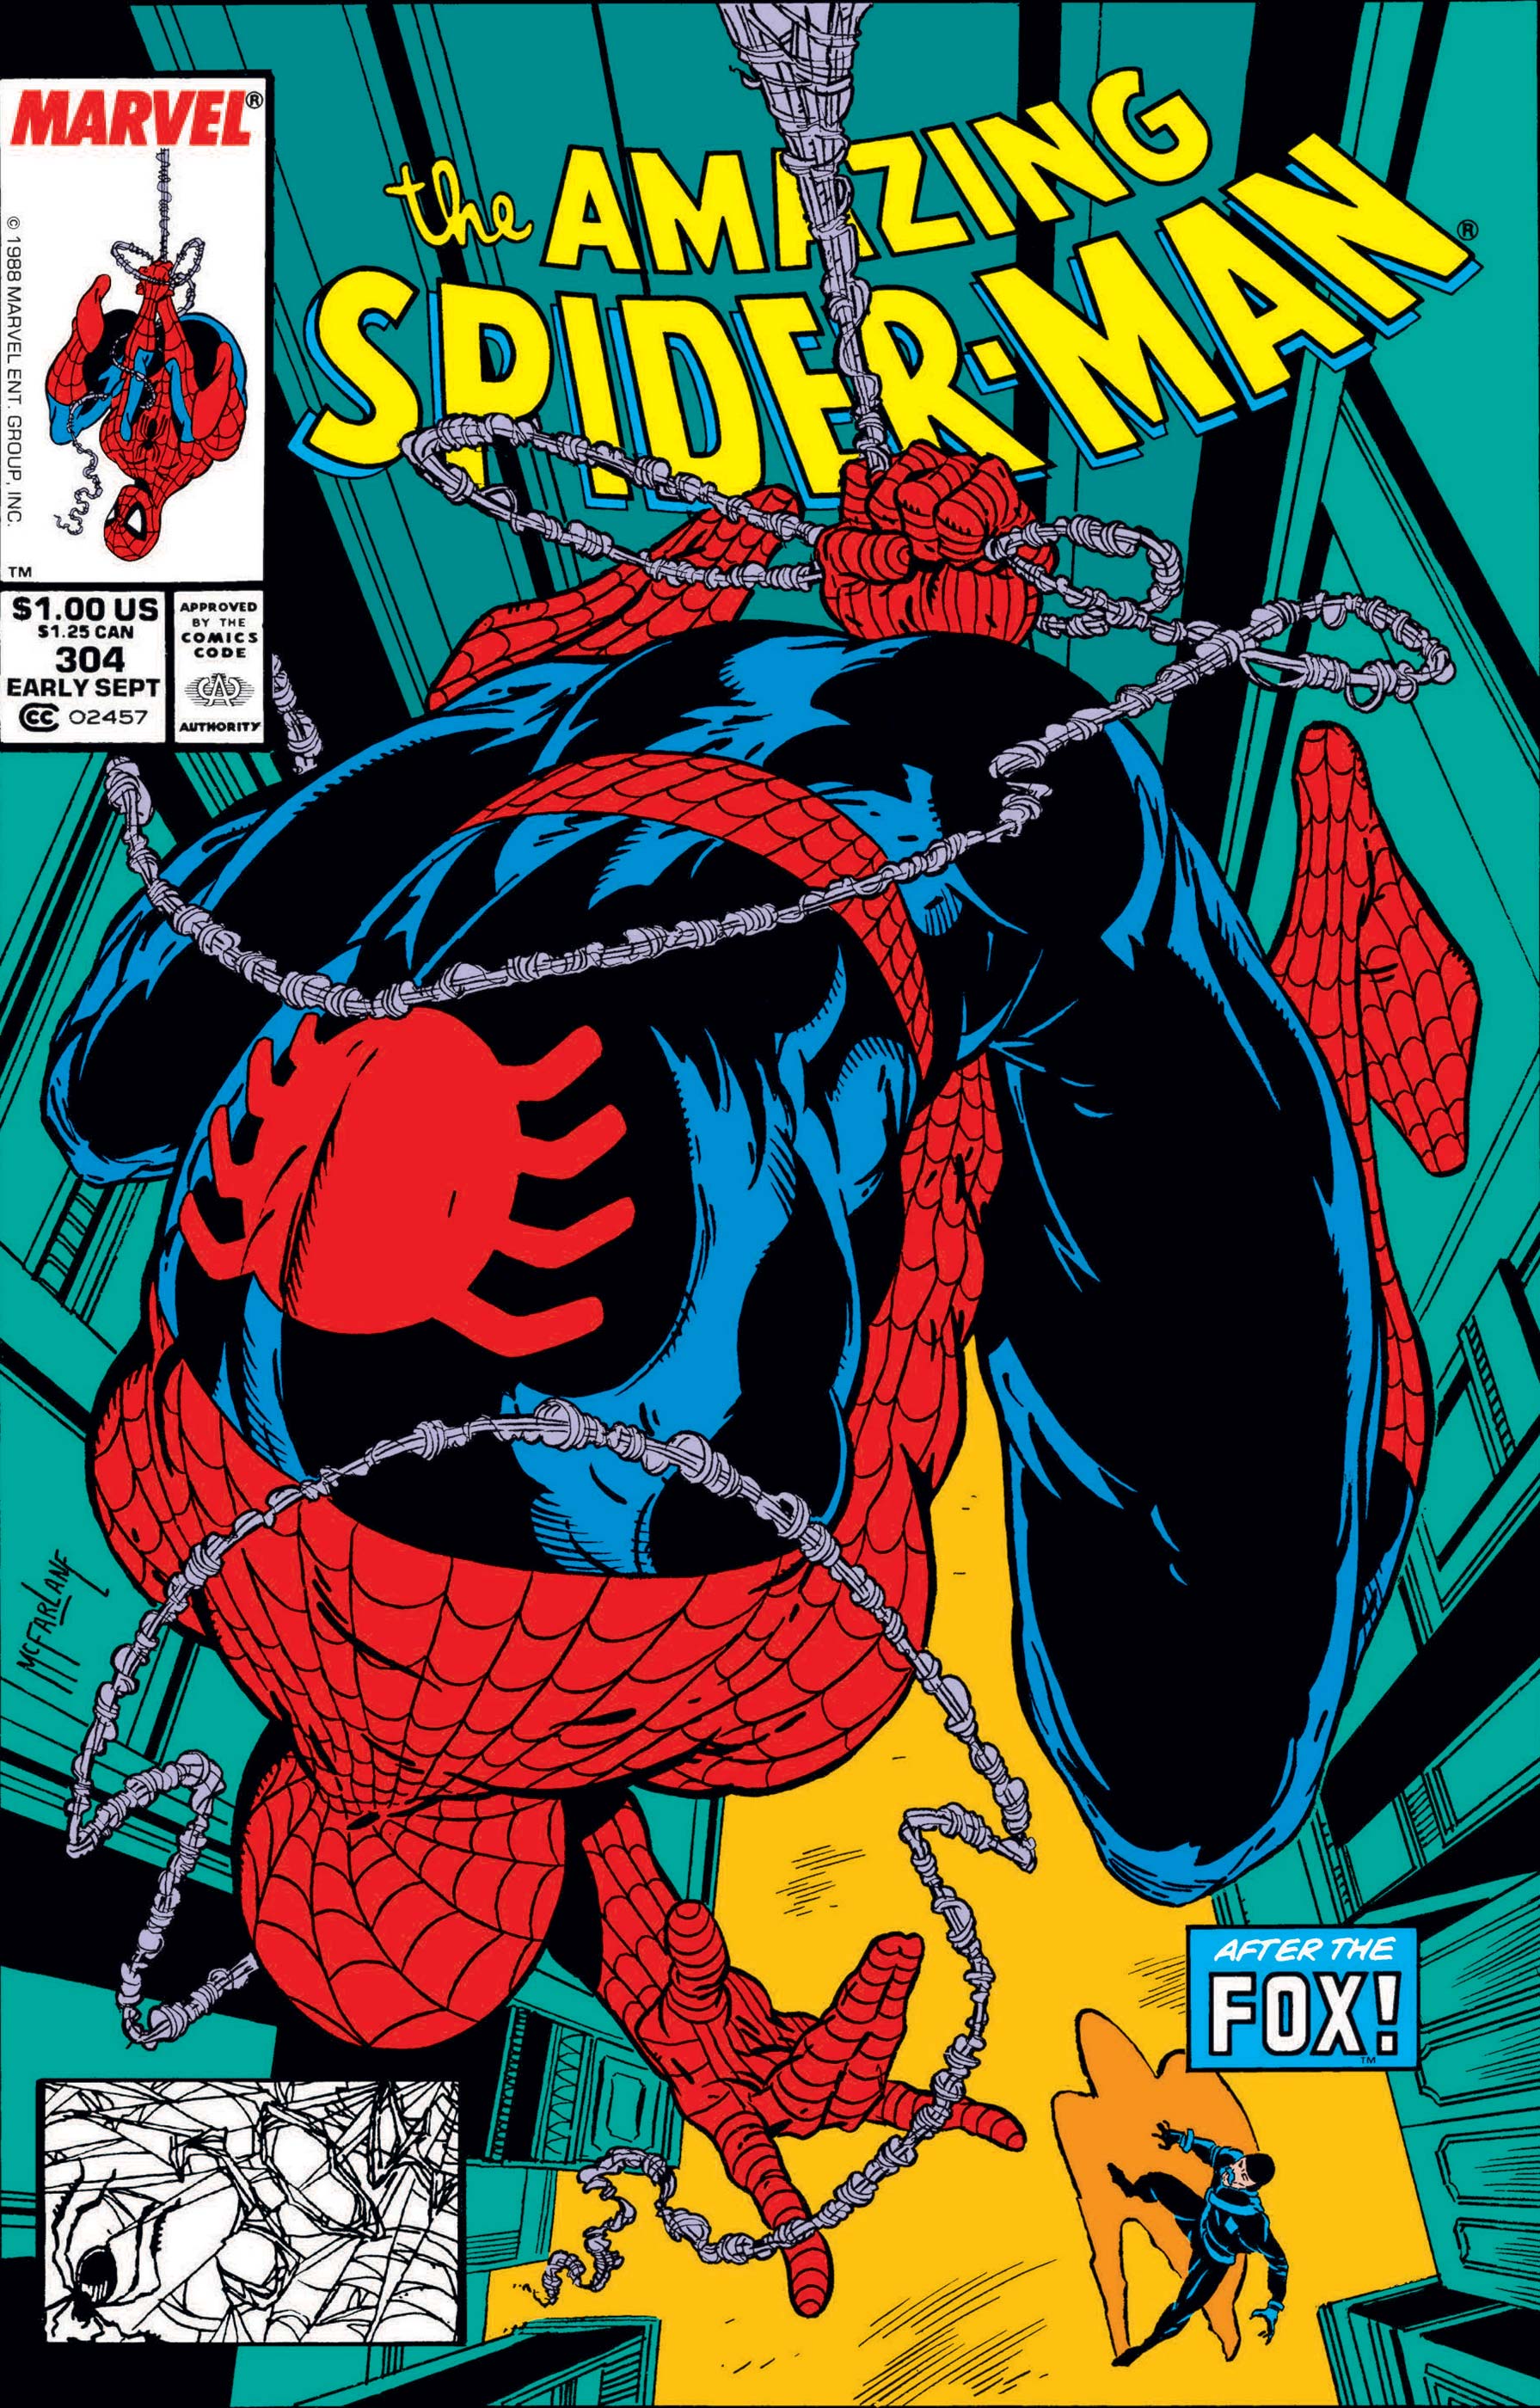 The Amazing Spider-Man (1963) #304 | Comic Issues | Marvel